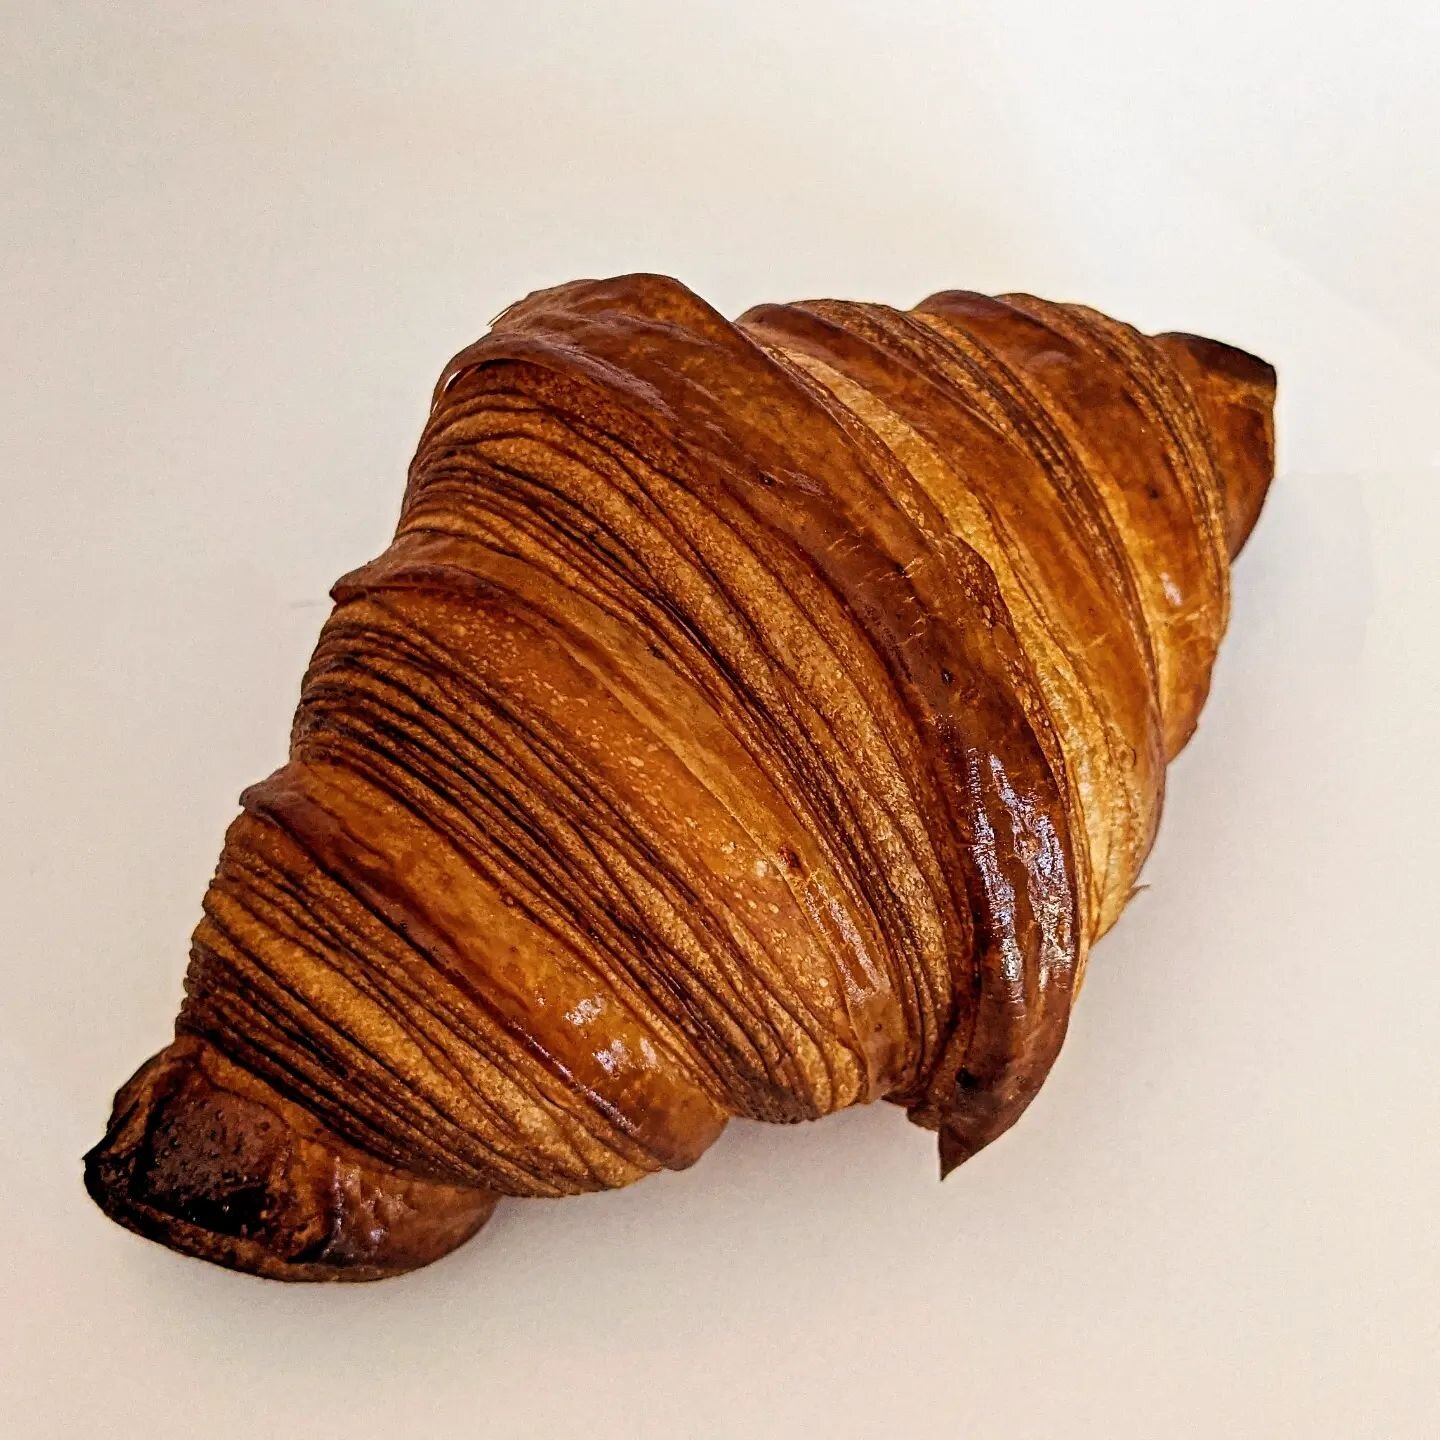 Croissants will be on the next bakeday menu! Straight up croissants! It's been ages since I made them. Get pumped!

#sundaybakeday #croissants #croissant #laminateddough #viennoiseries #eatgrandrapids #eatgr #grfood #grfoodie #grandrapidsfood #grandr